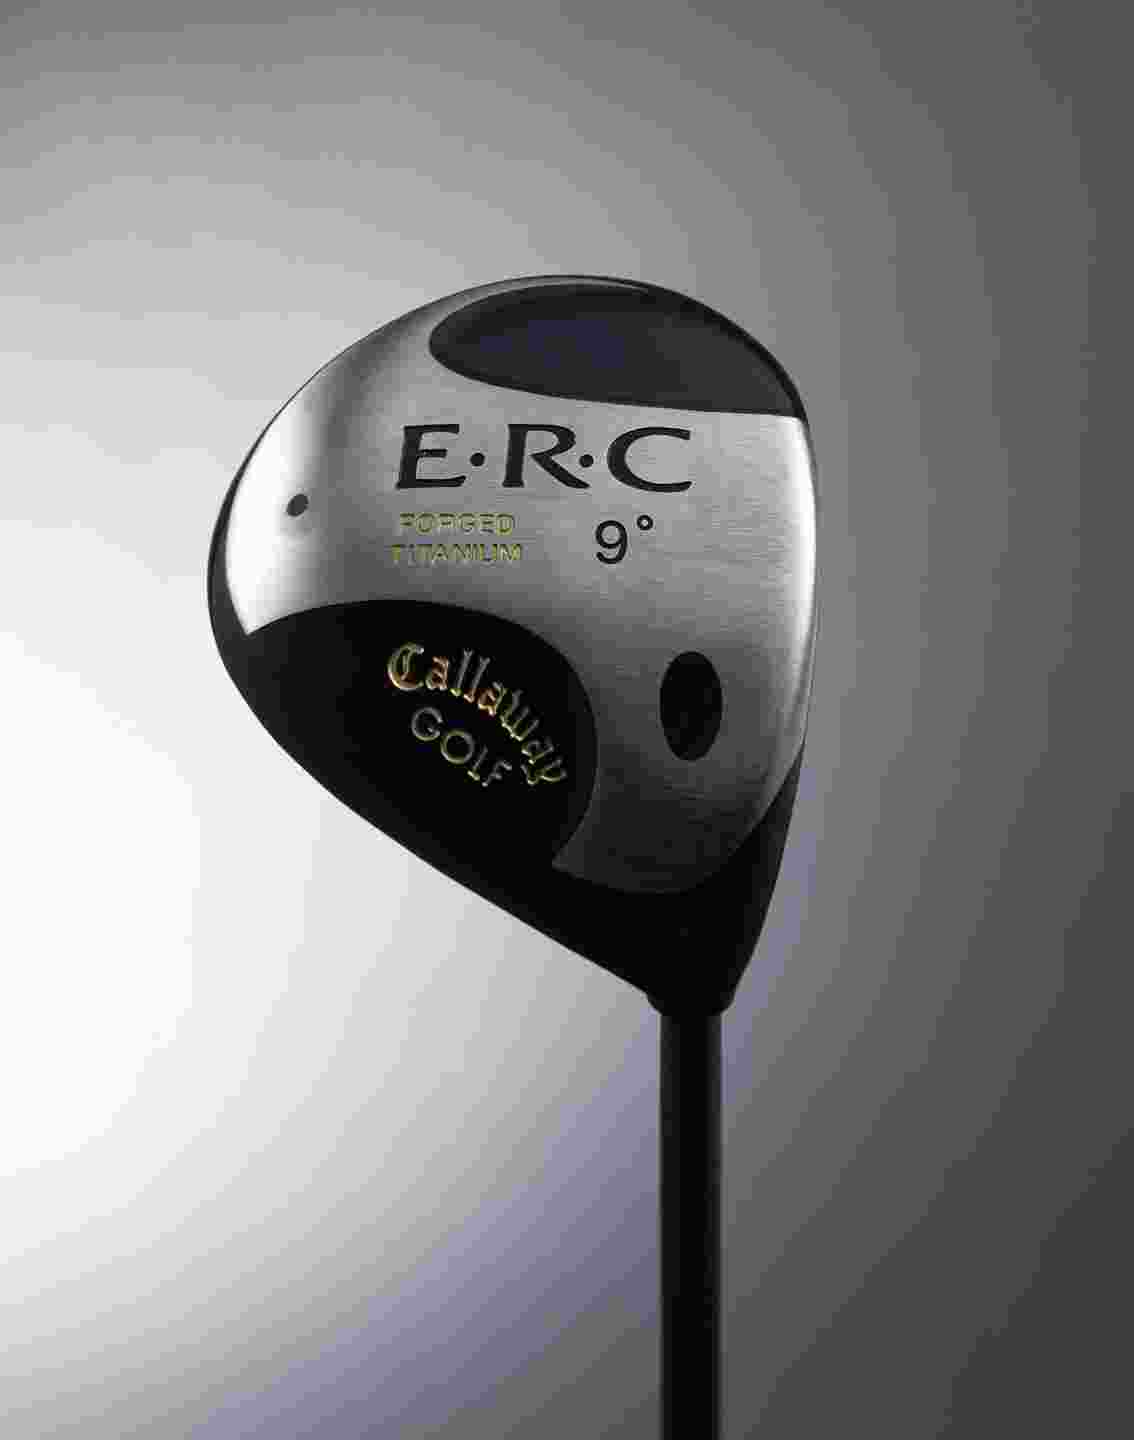 Tried and tested: Callaway ERC